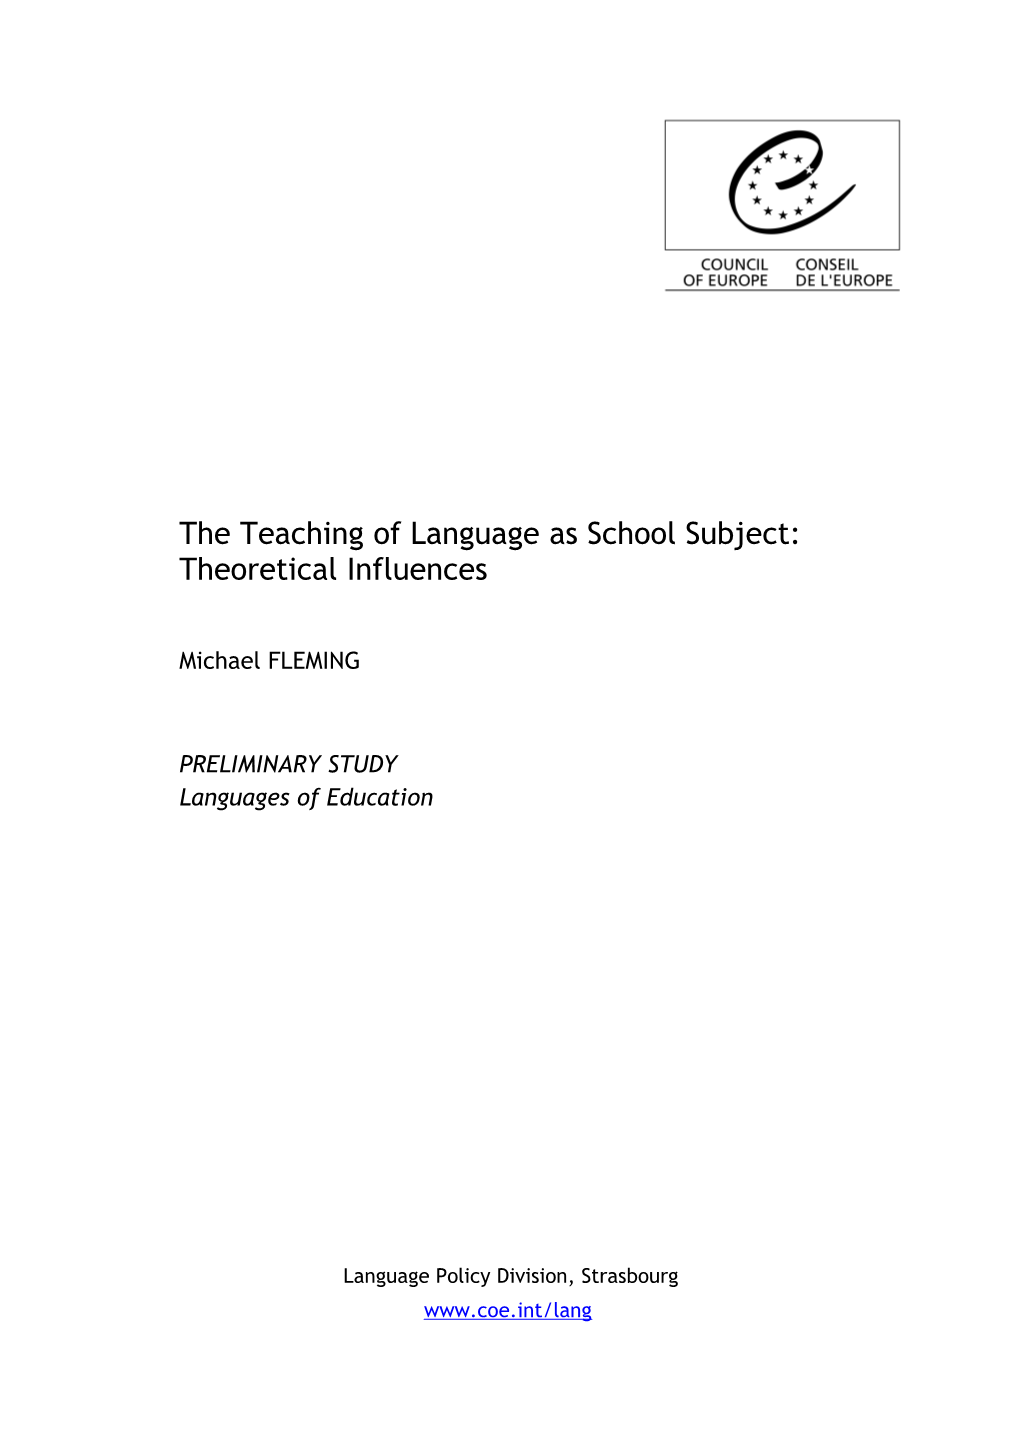 The Teaching of Language As School Subject: Theoretical Influences